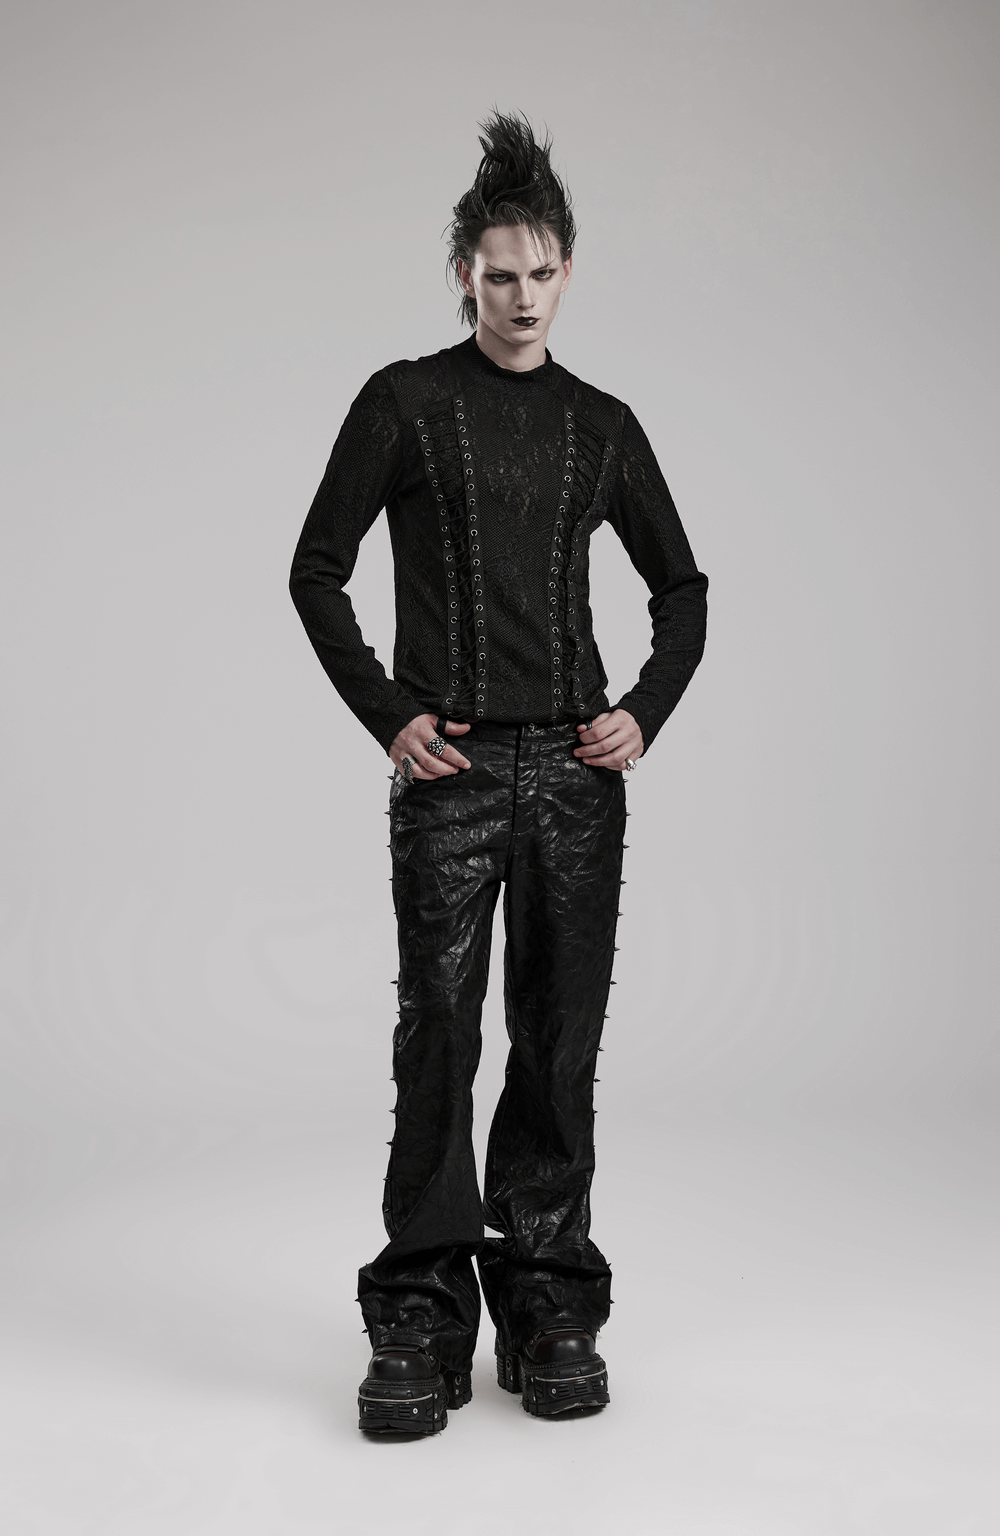 Edgy Black Faux Leather Spiked Goth Pants for Punk Fashion